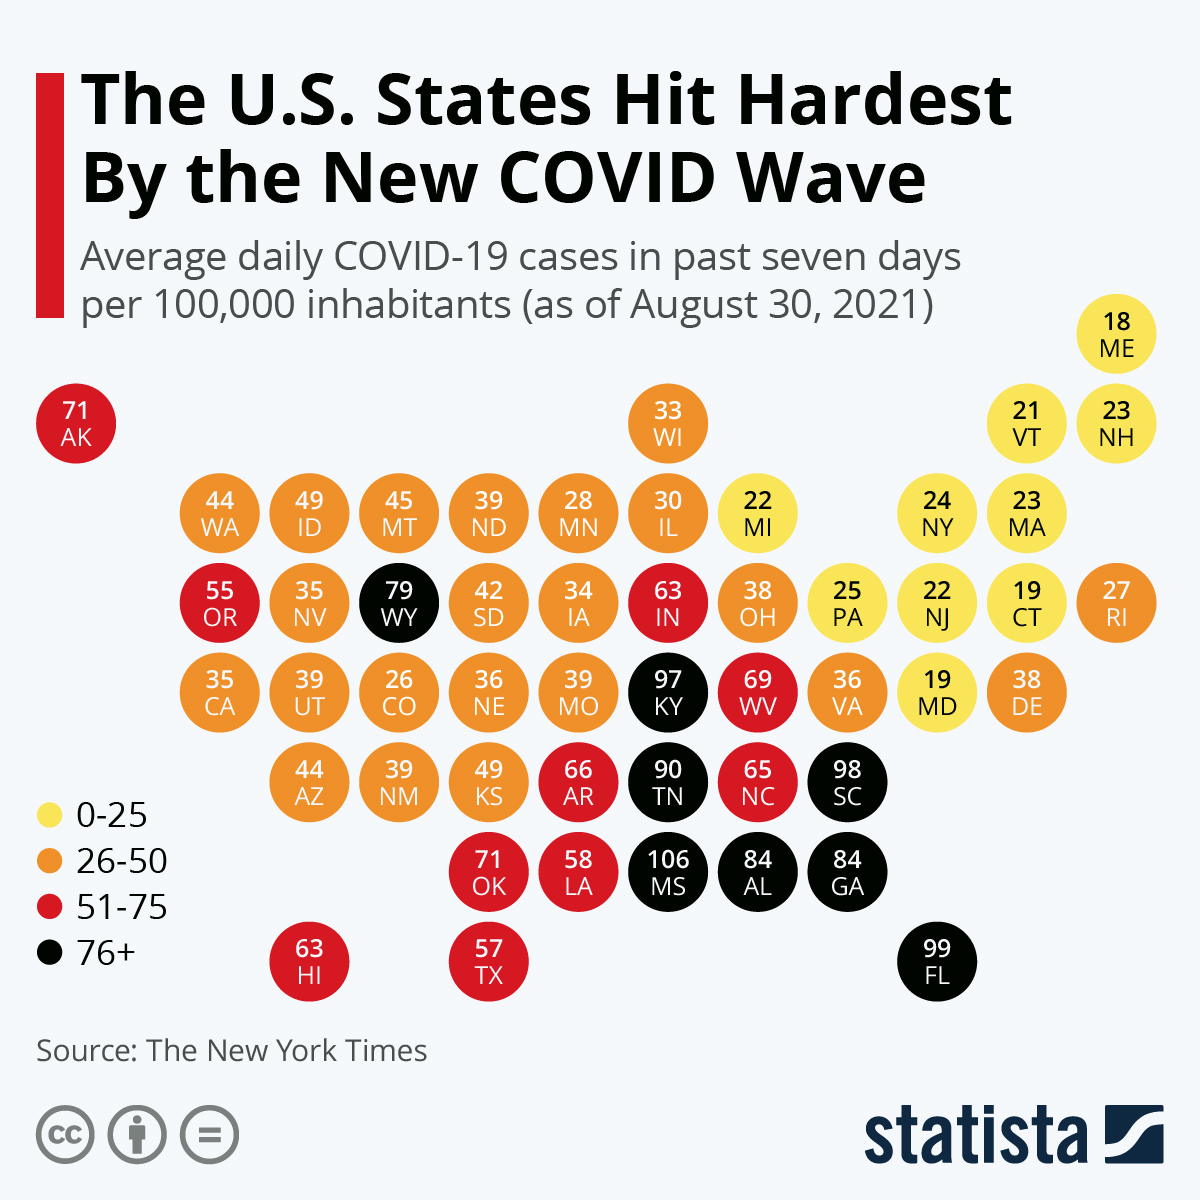 The U.S. States Hit Hardest By the New COVID Wave